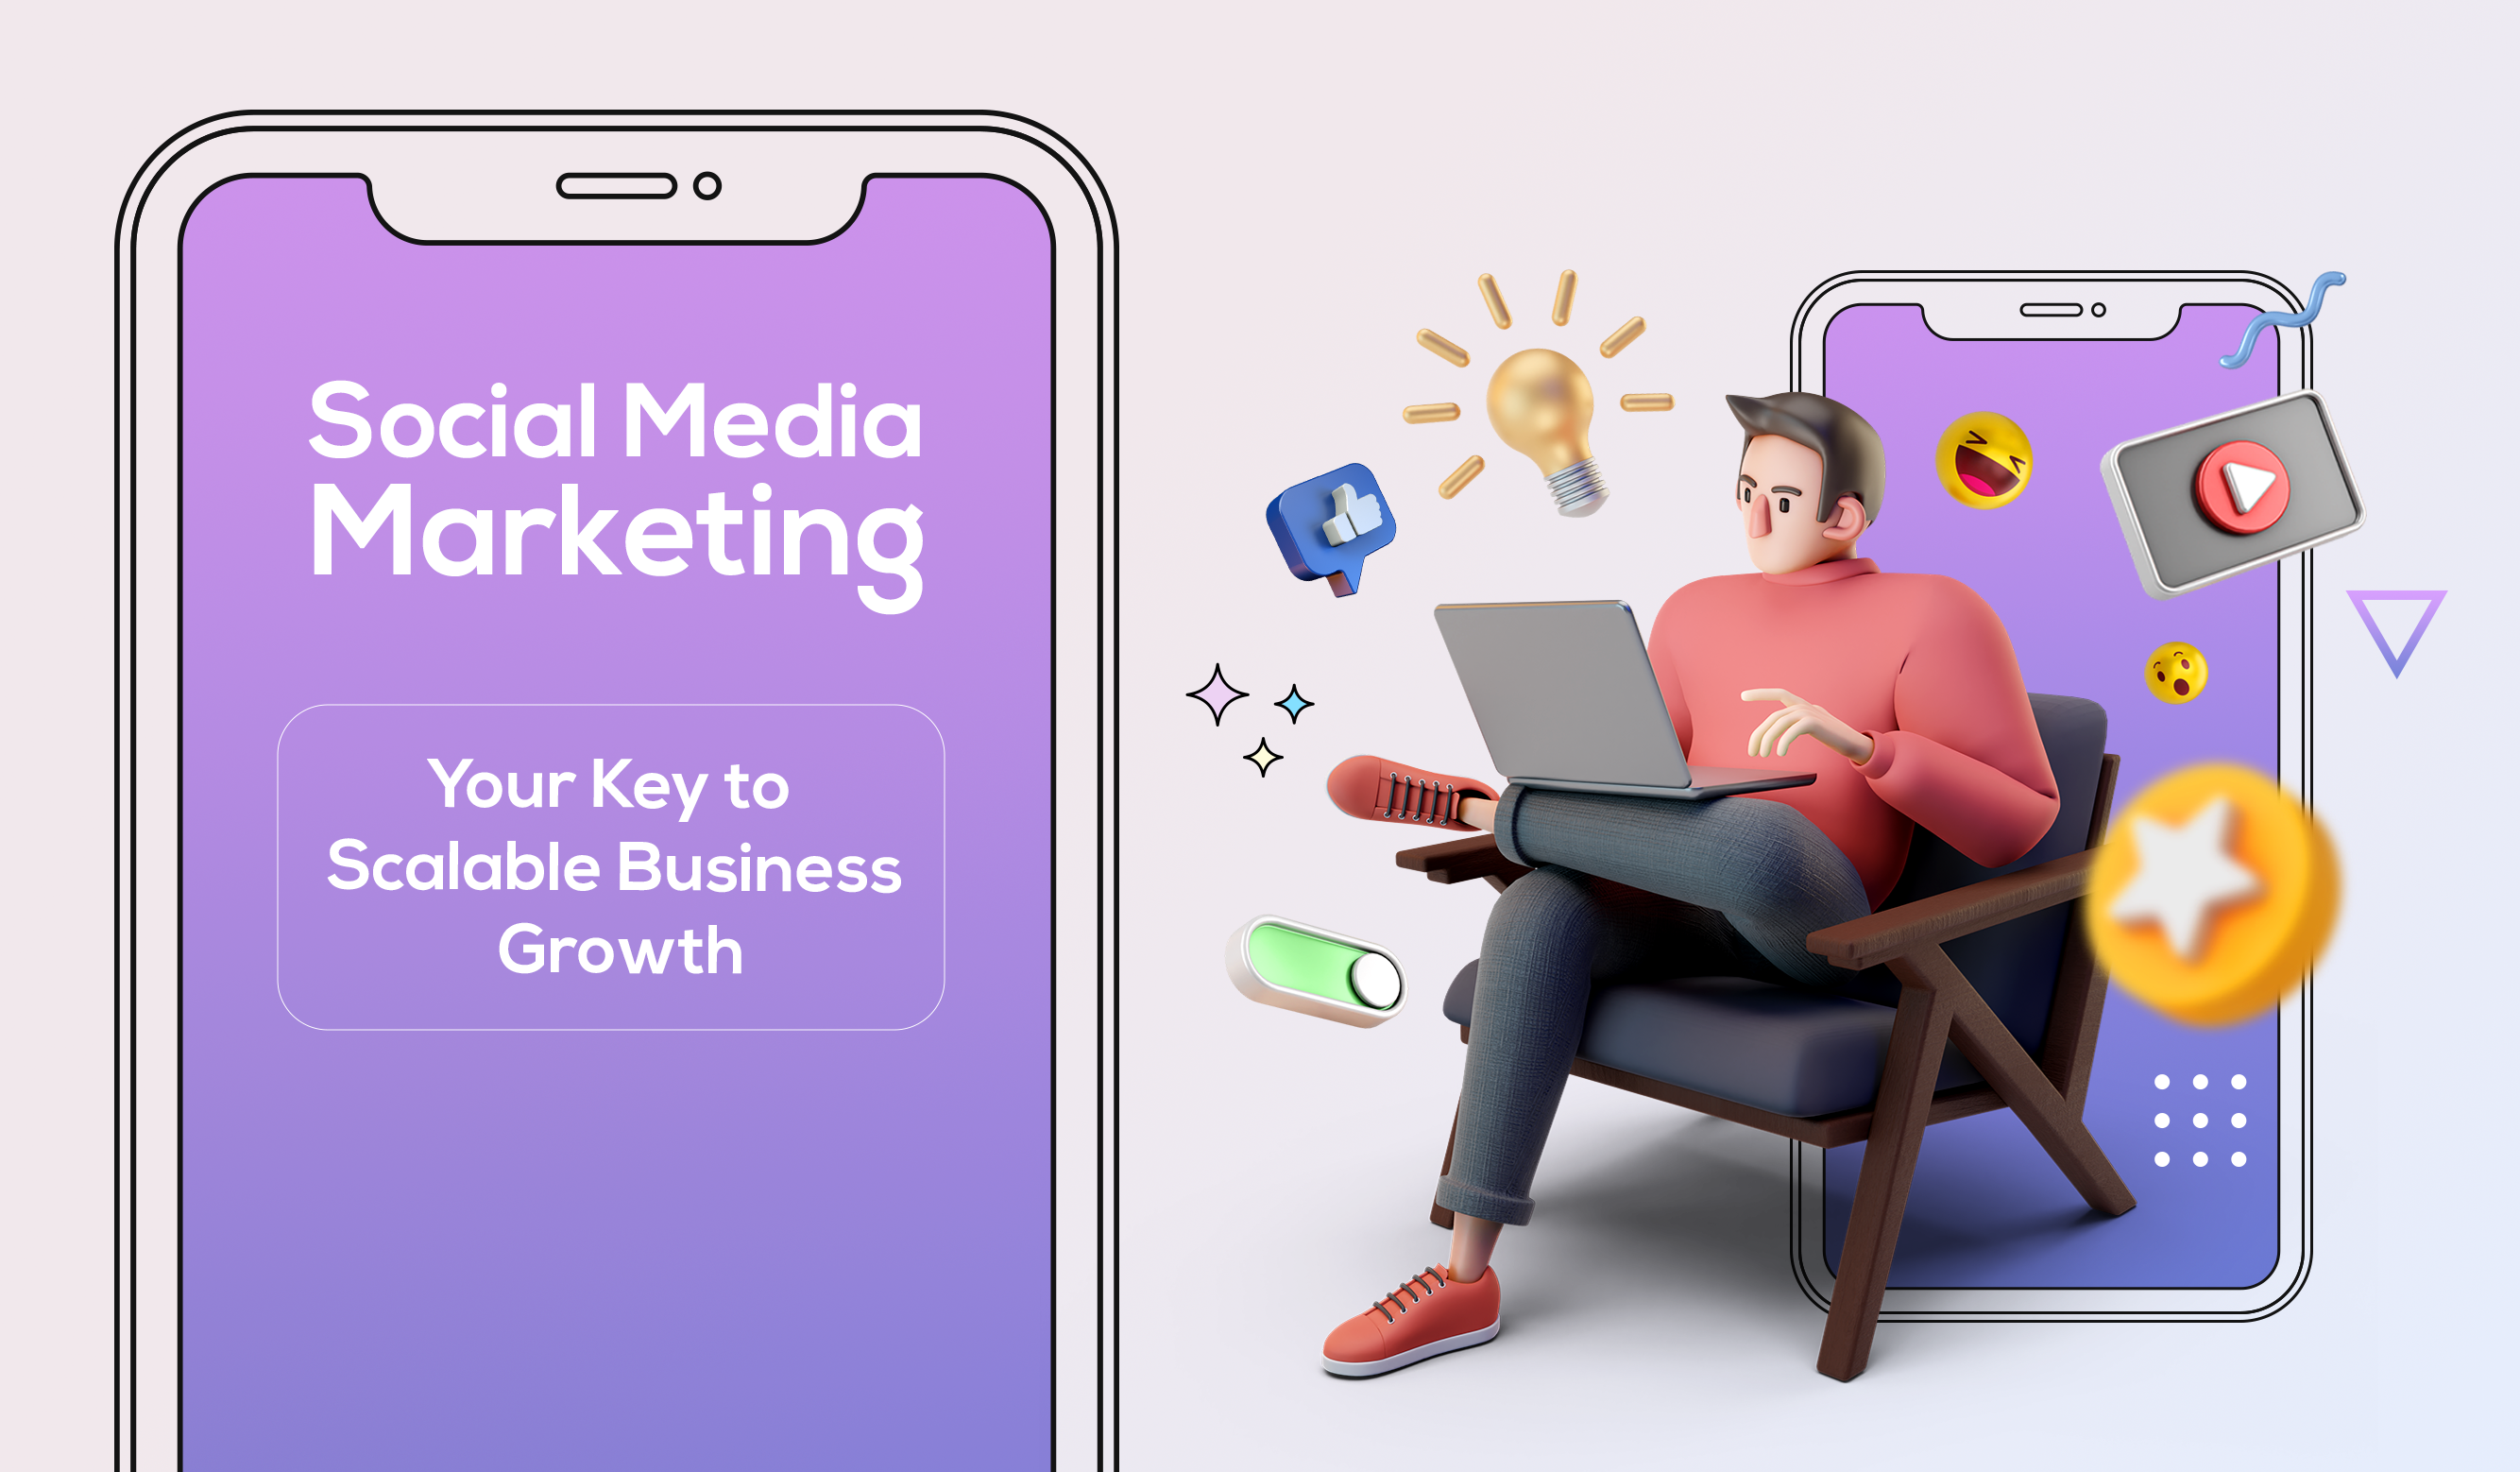 Social Media Marketing: Your Key to Scalable Business Growth